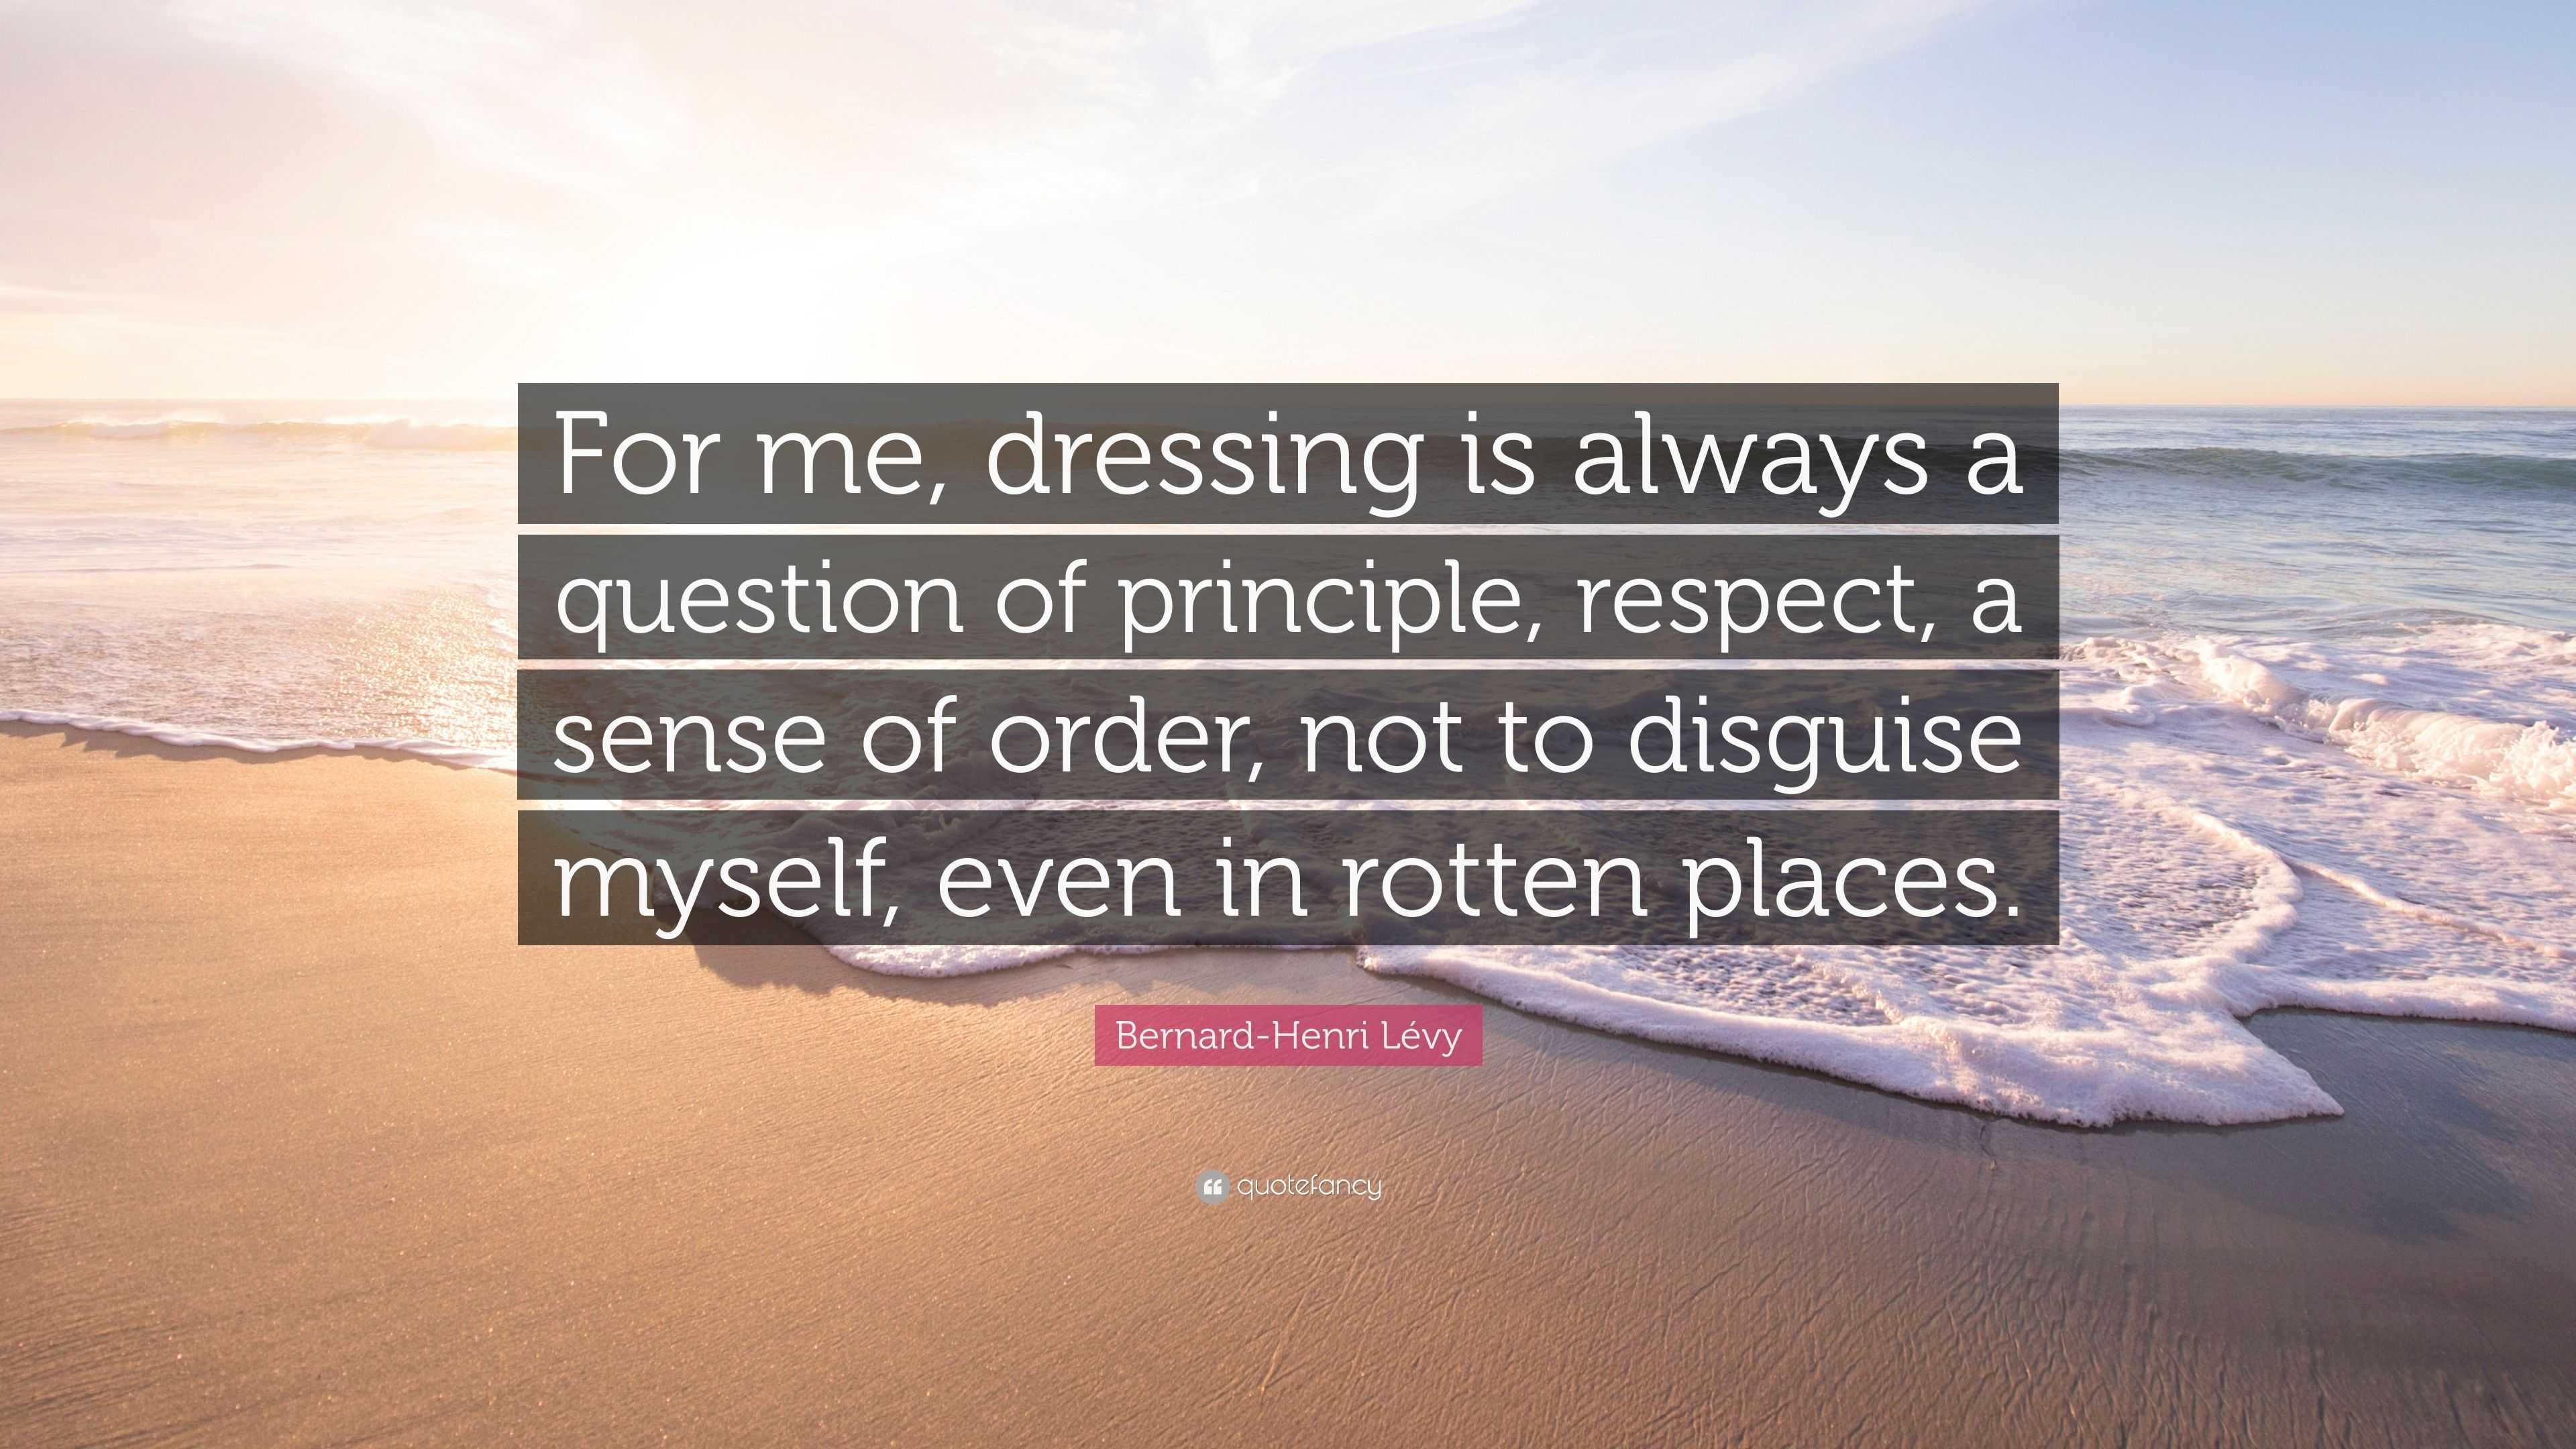 6319768 Bernard Henri L vy Quote For me dressing is always a question of